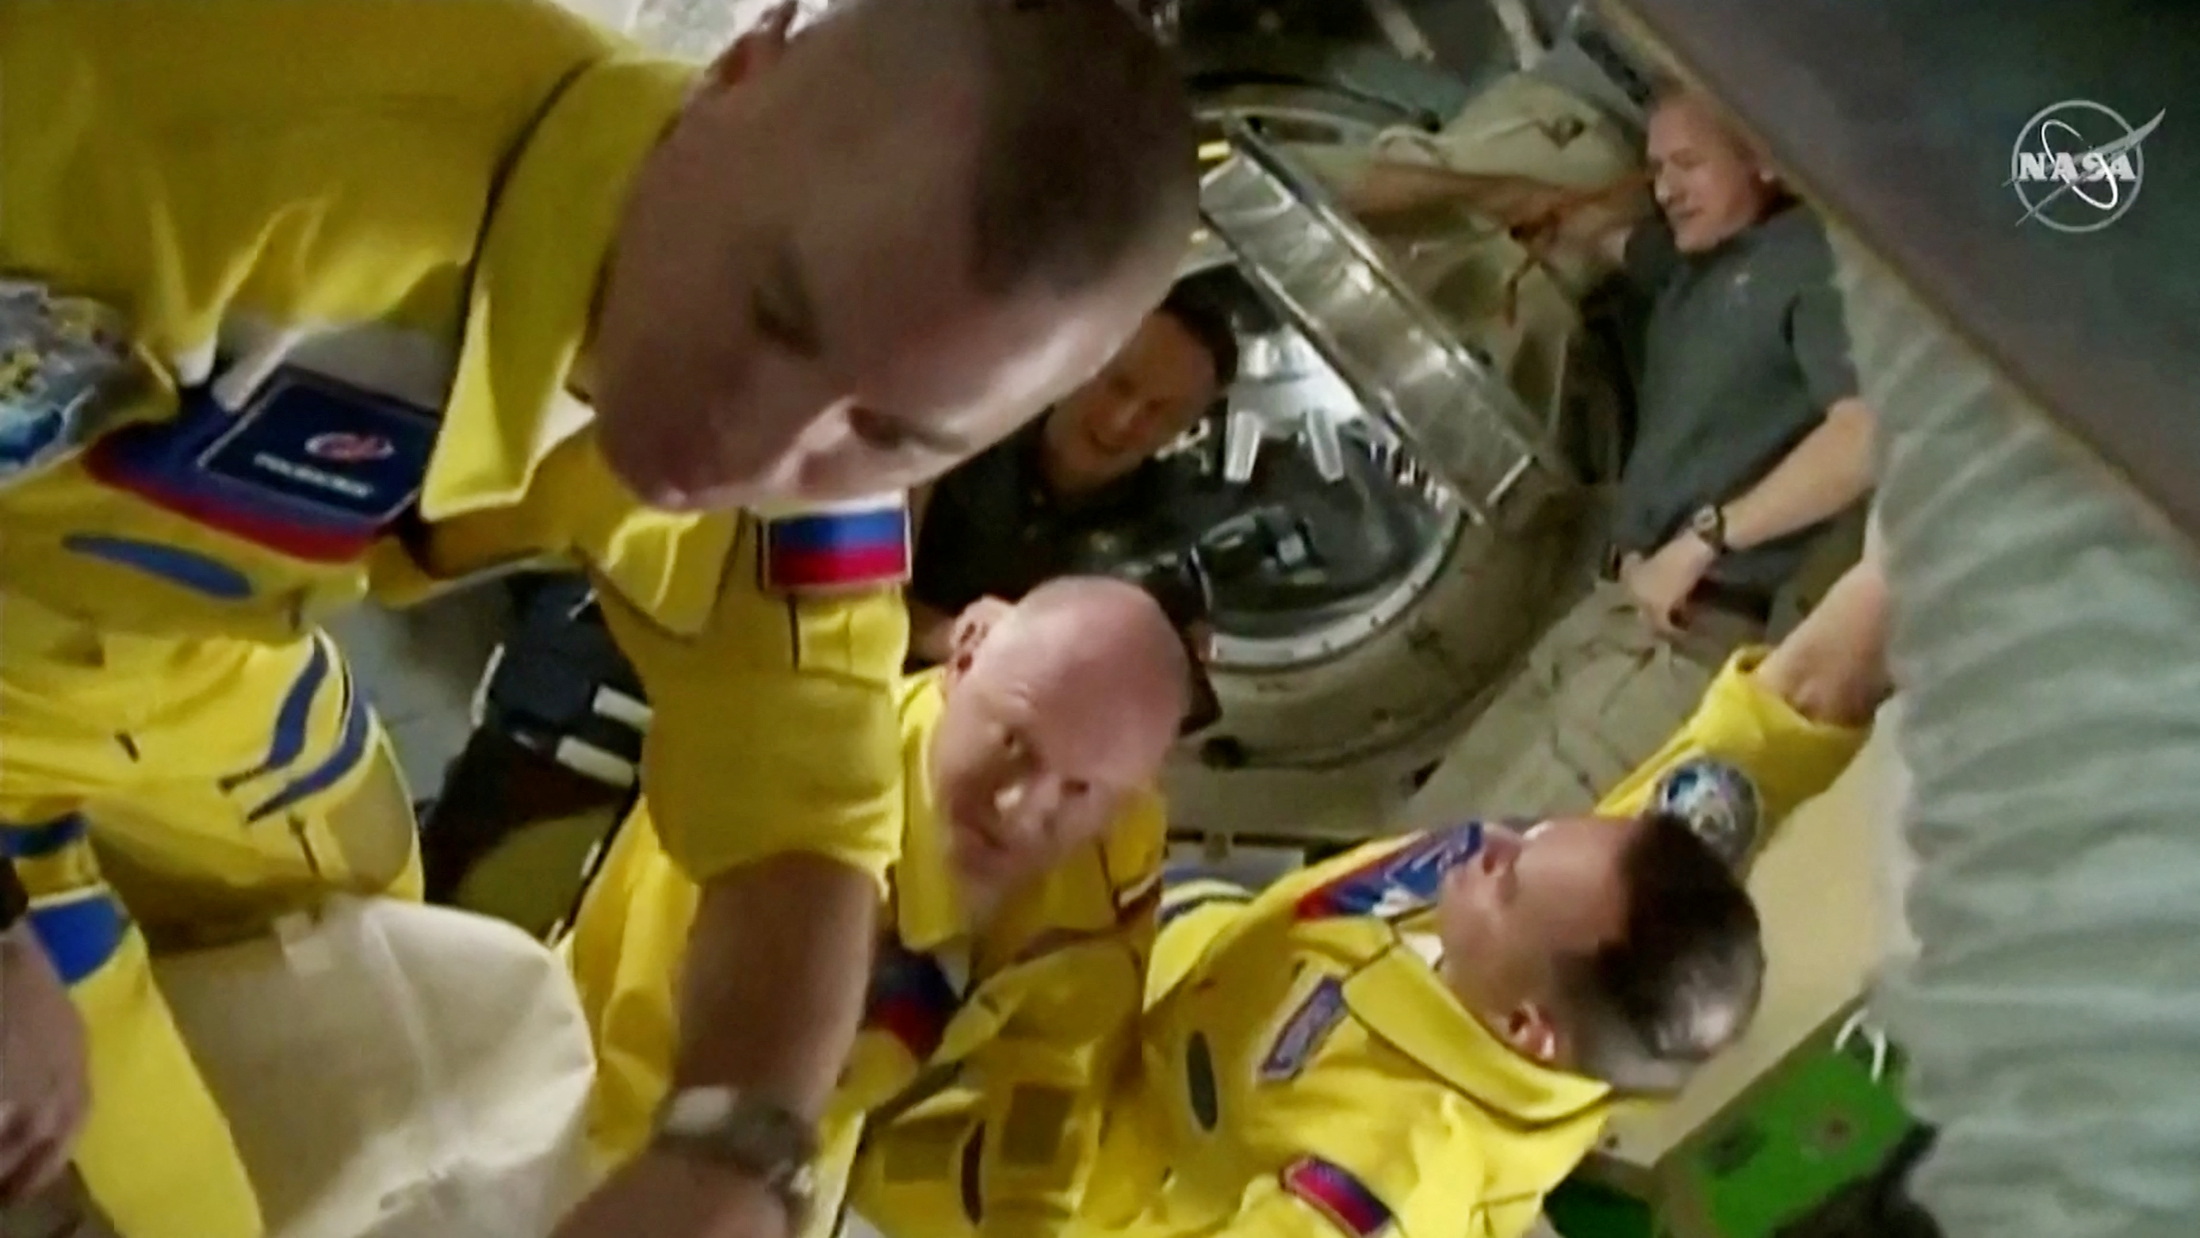 Russian cosmonauts arrive wearing yellow and blue flight suits at the International Space Station